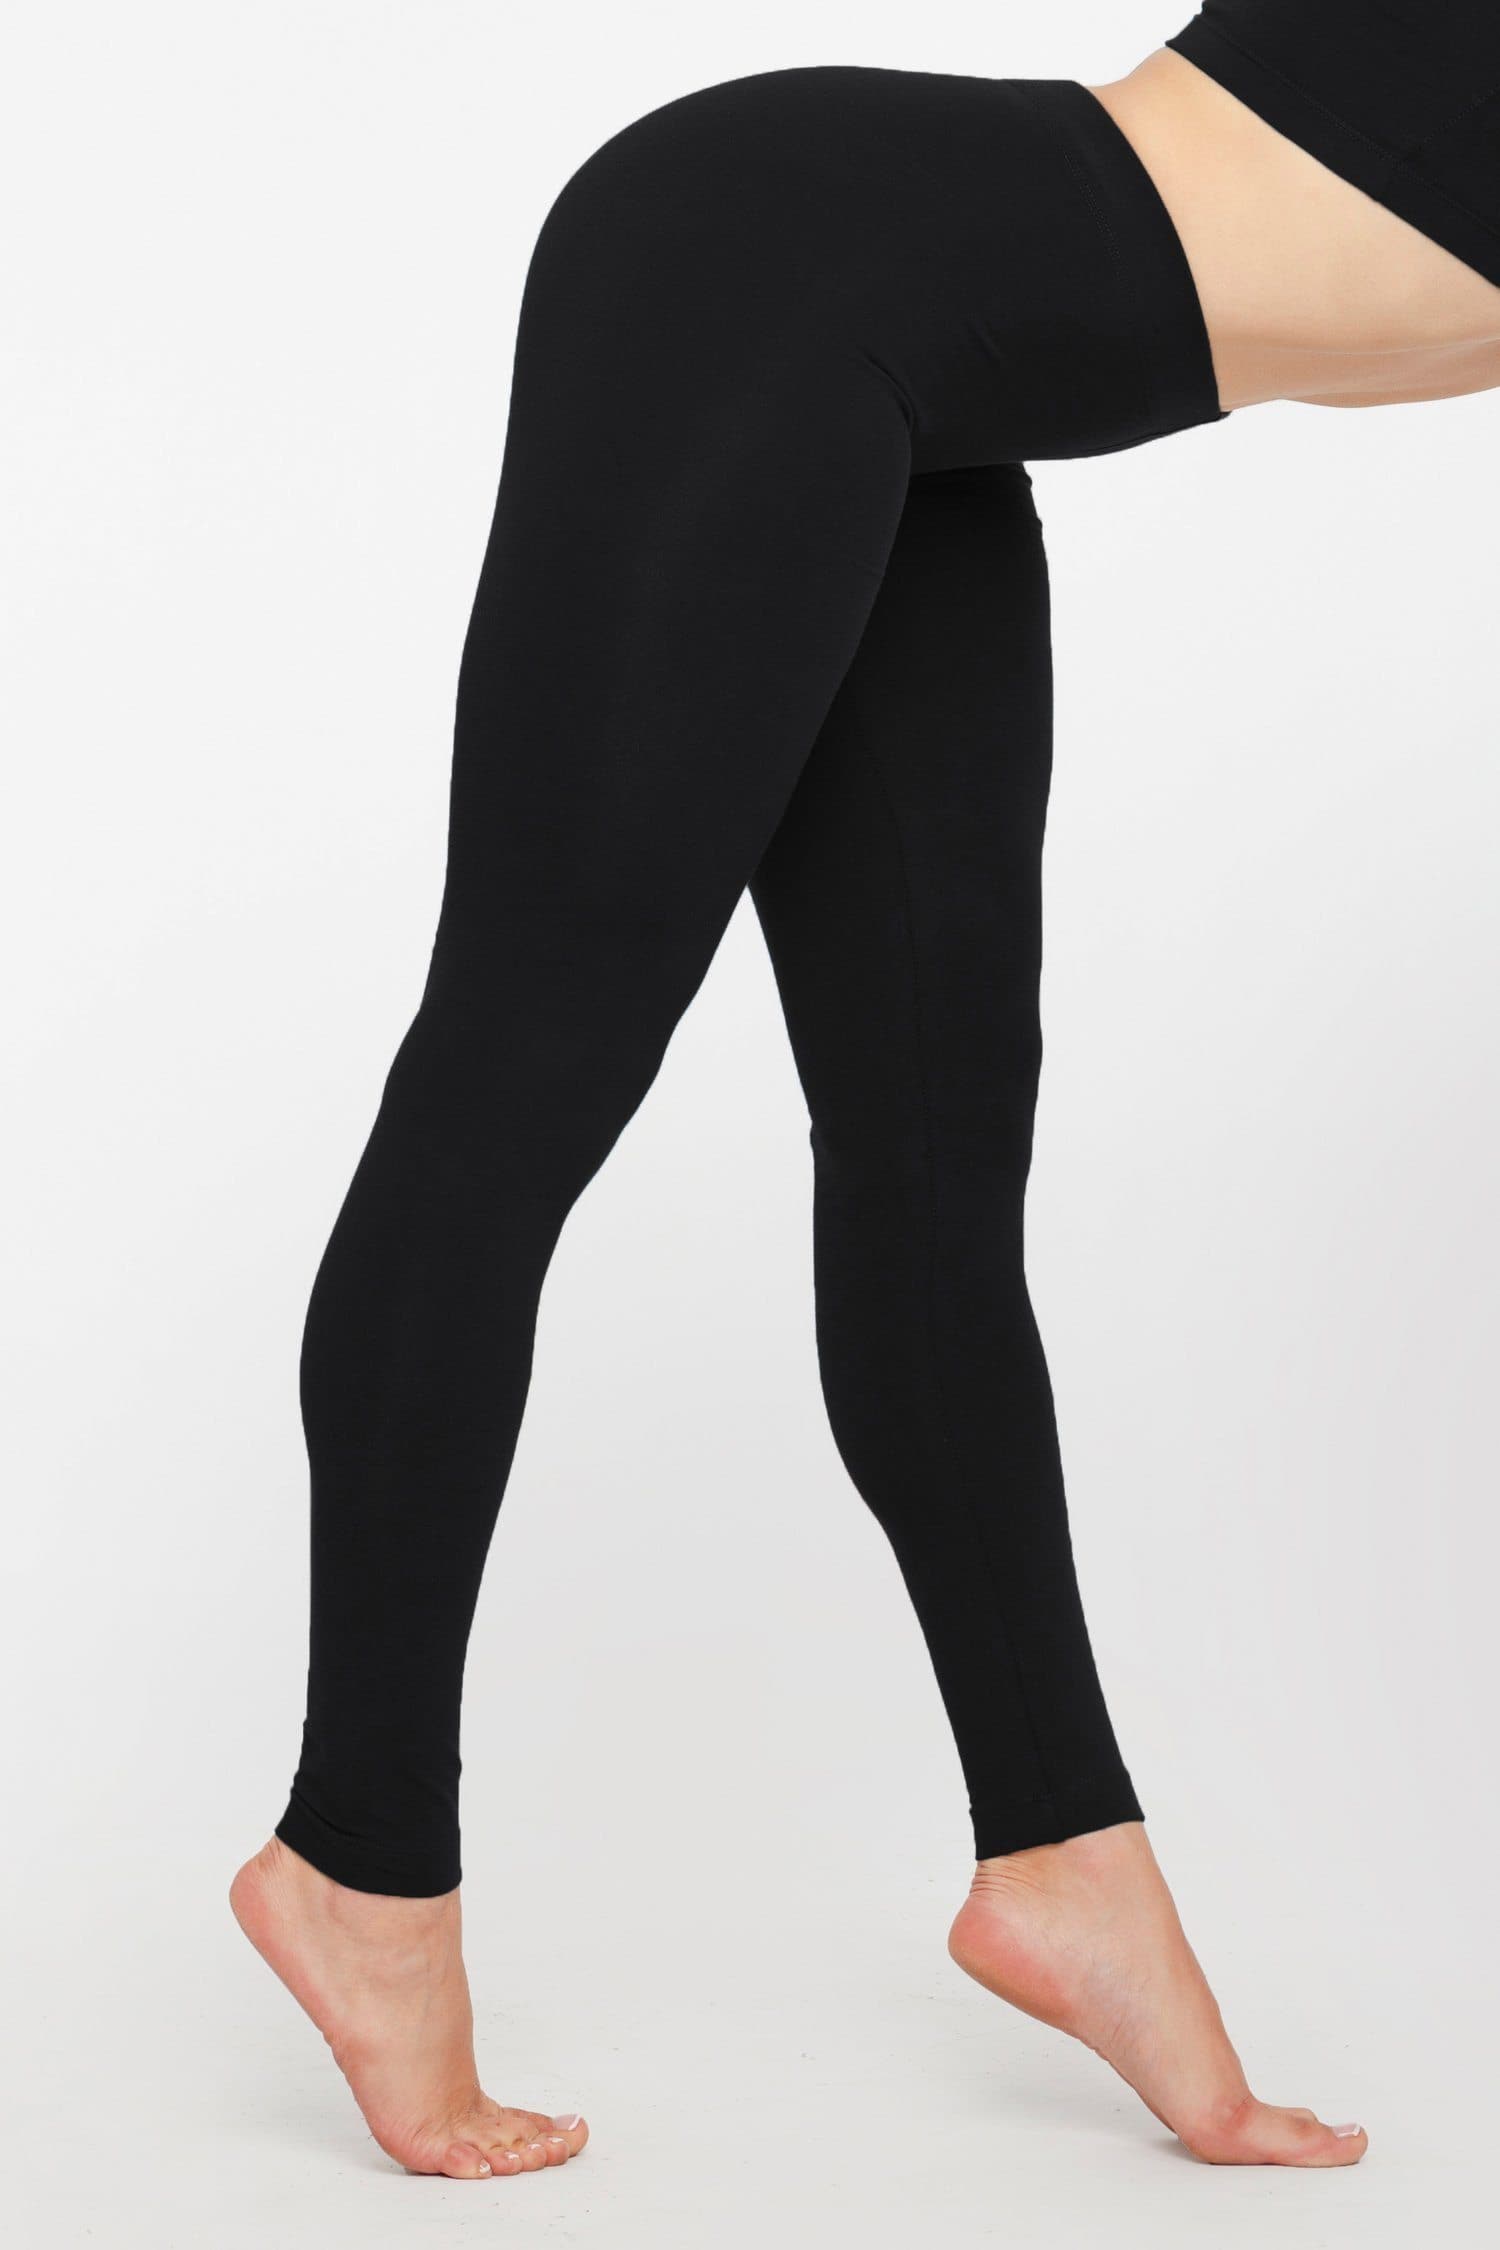 12 Best Maternity Leggings for Workouts and Every Day in 2020 | SELF